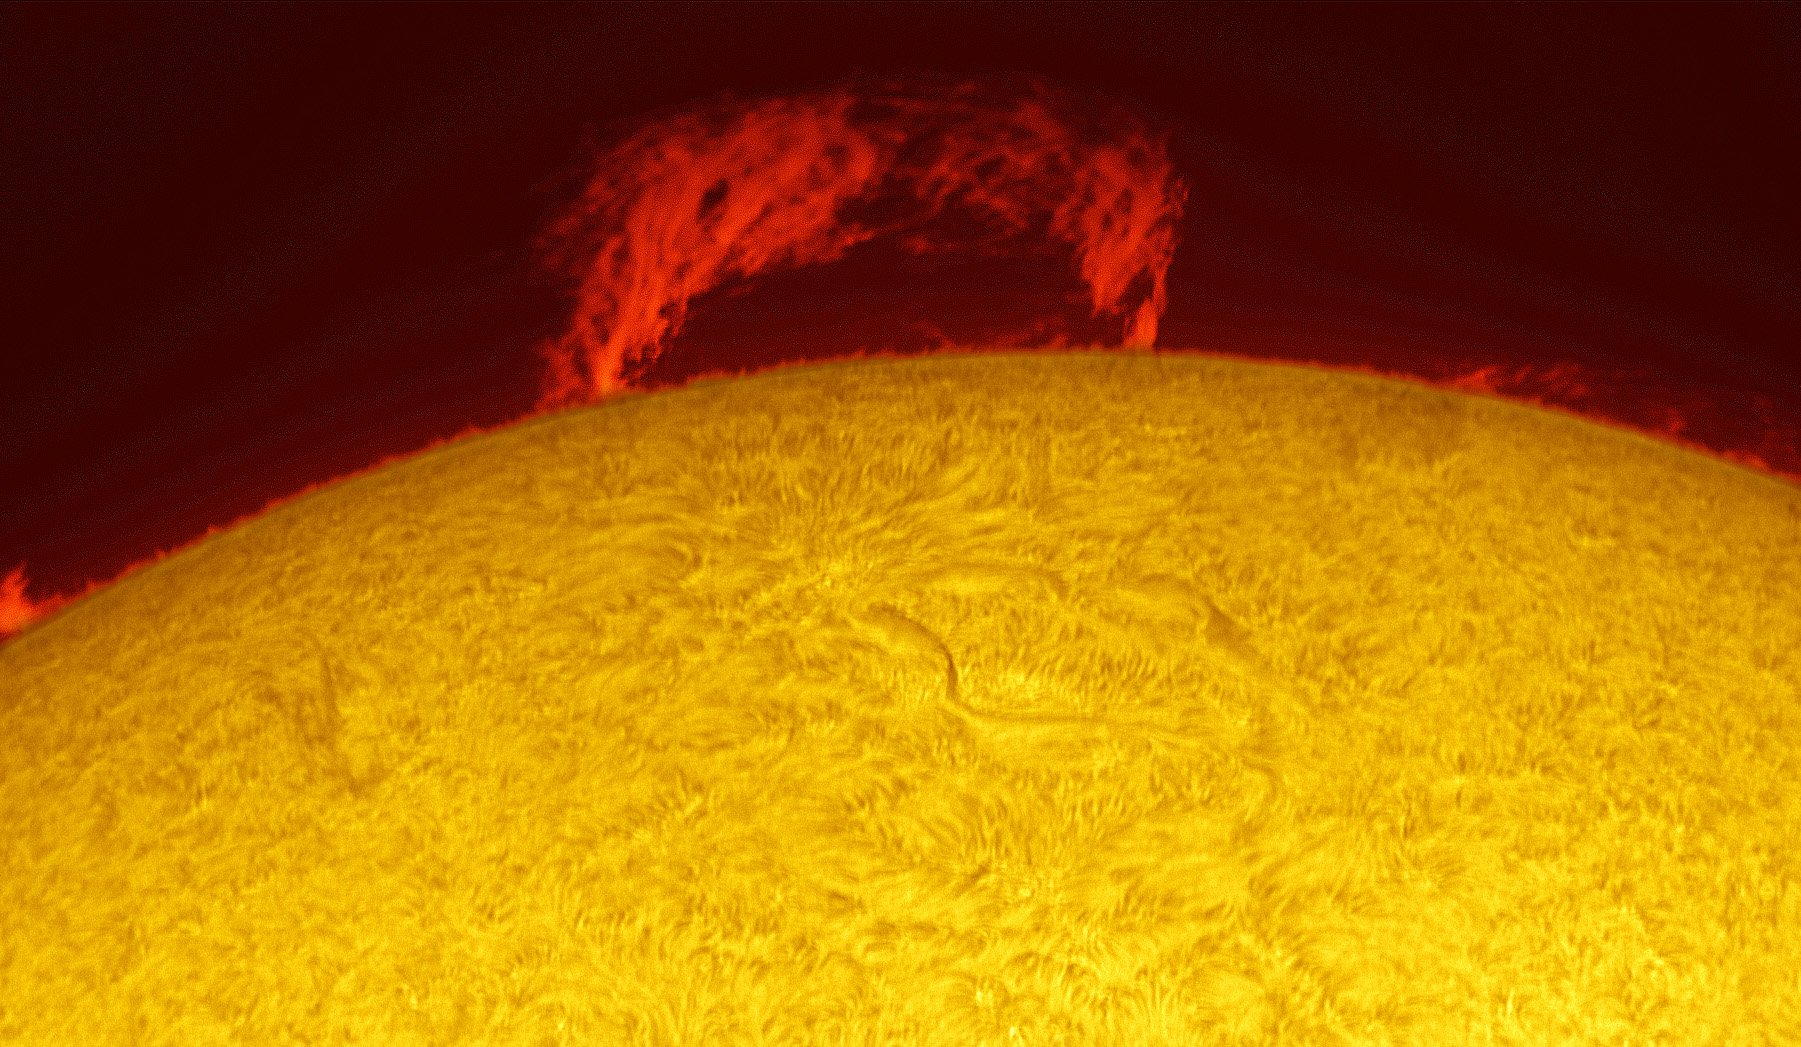 Beautiful Prominence Arc on August 3, 2022